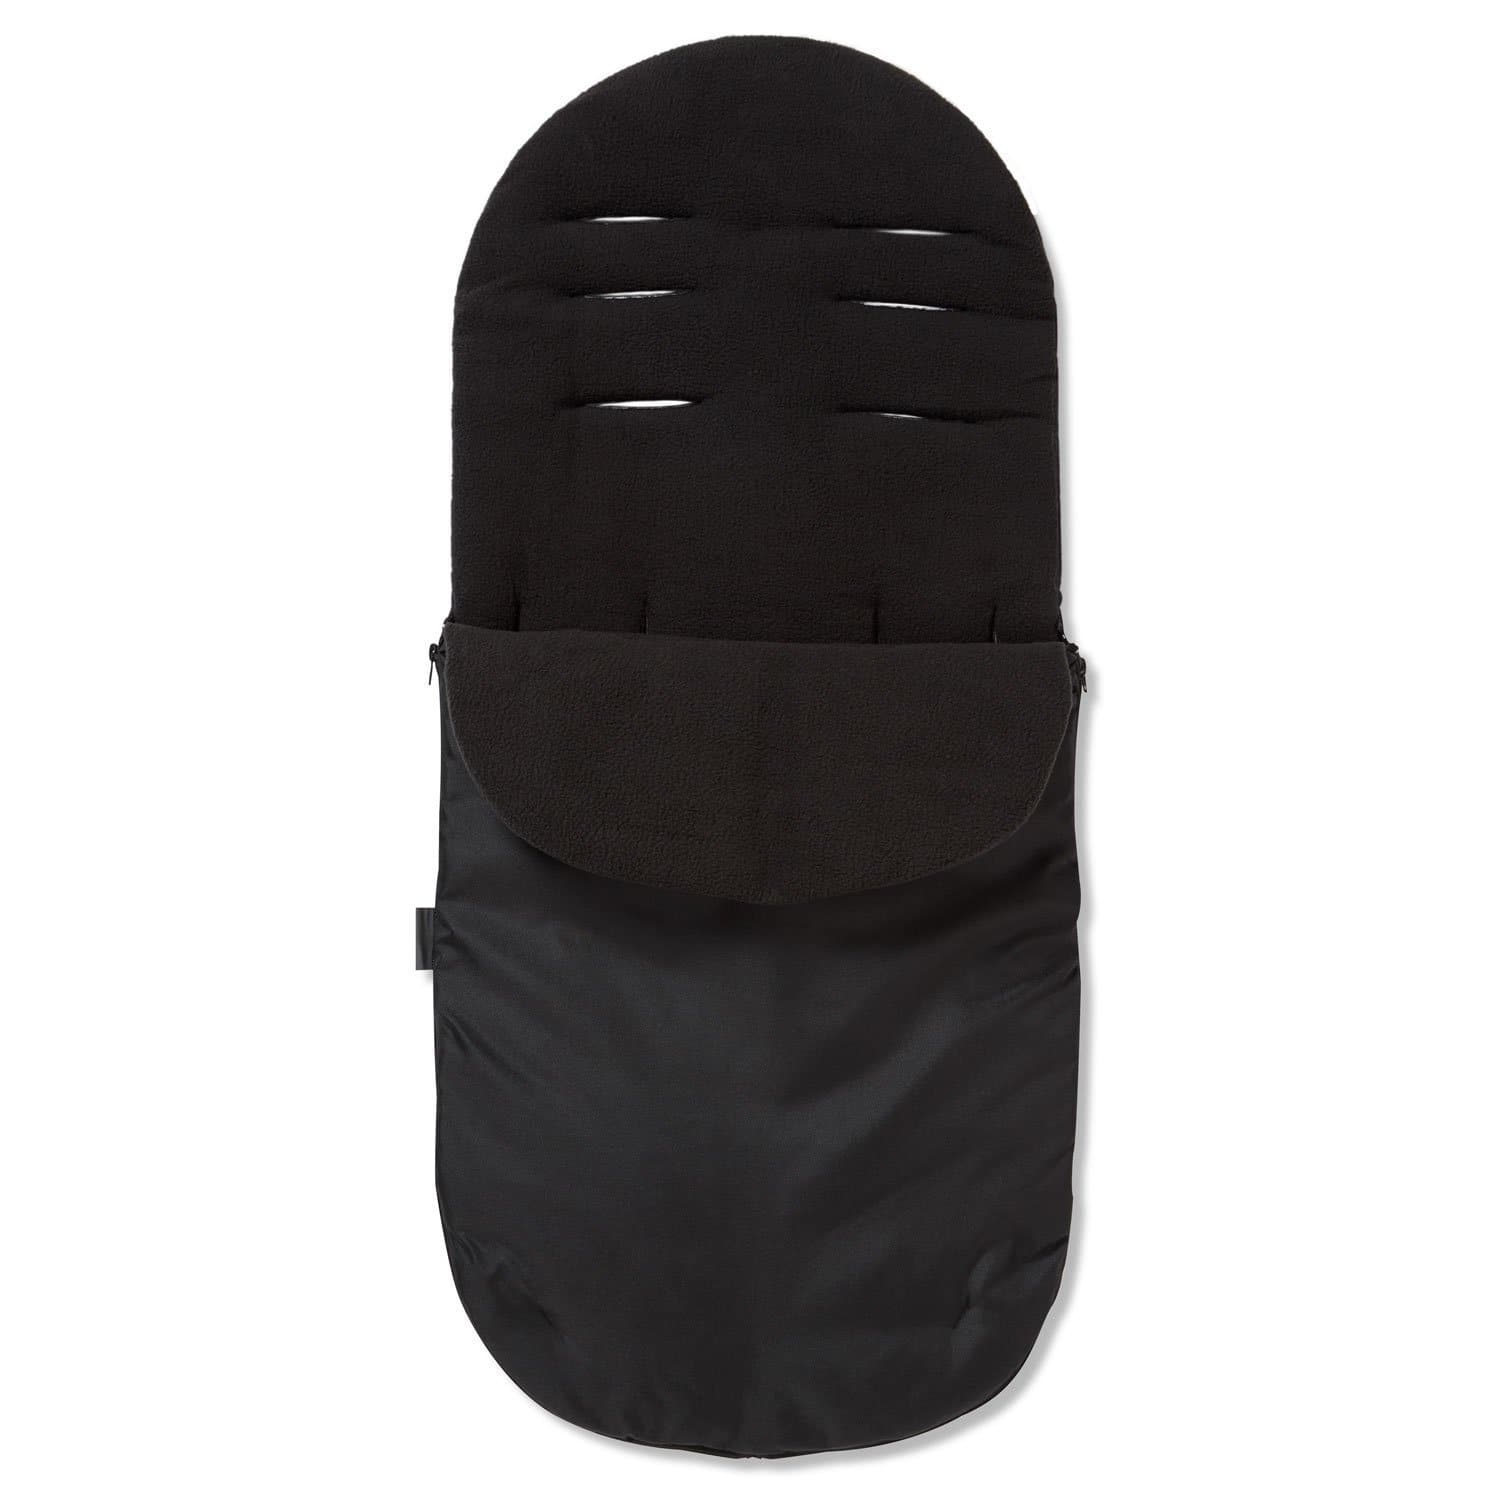 Footmuff / Cosy Toes Compatible with Hesba - Black / Fits All Models | For Your Little One